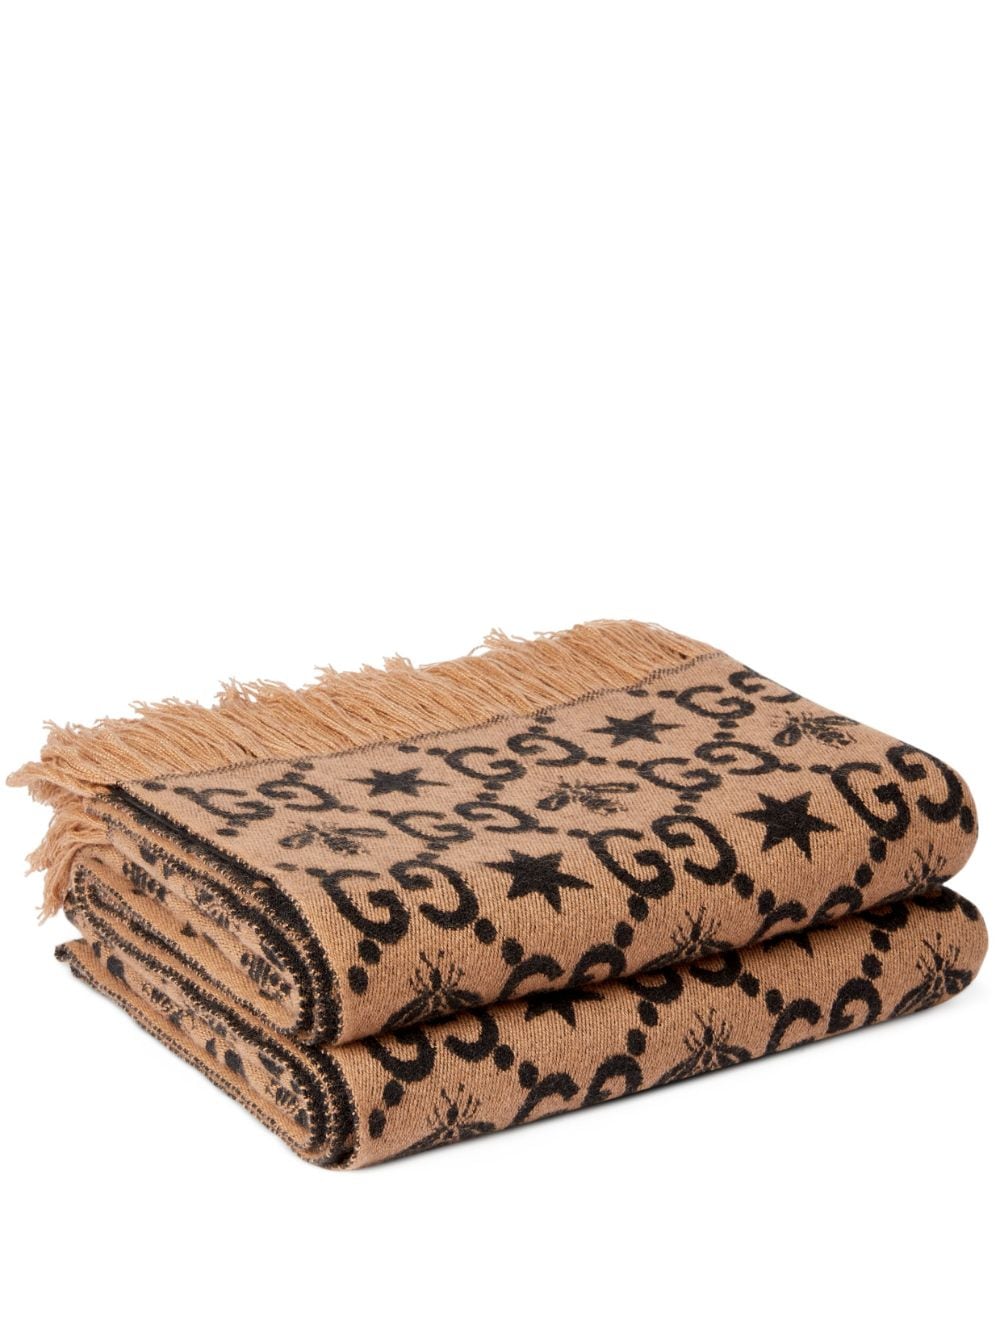 Image 1 of Gucci GG pattern throw blanket